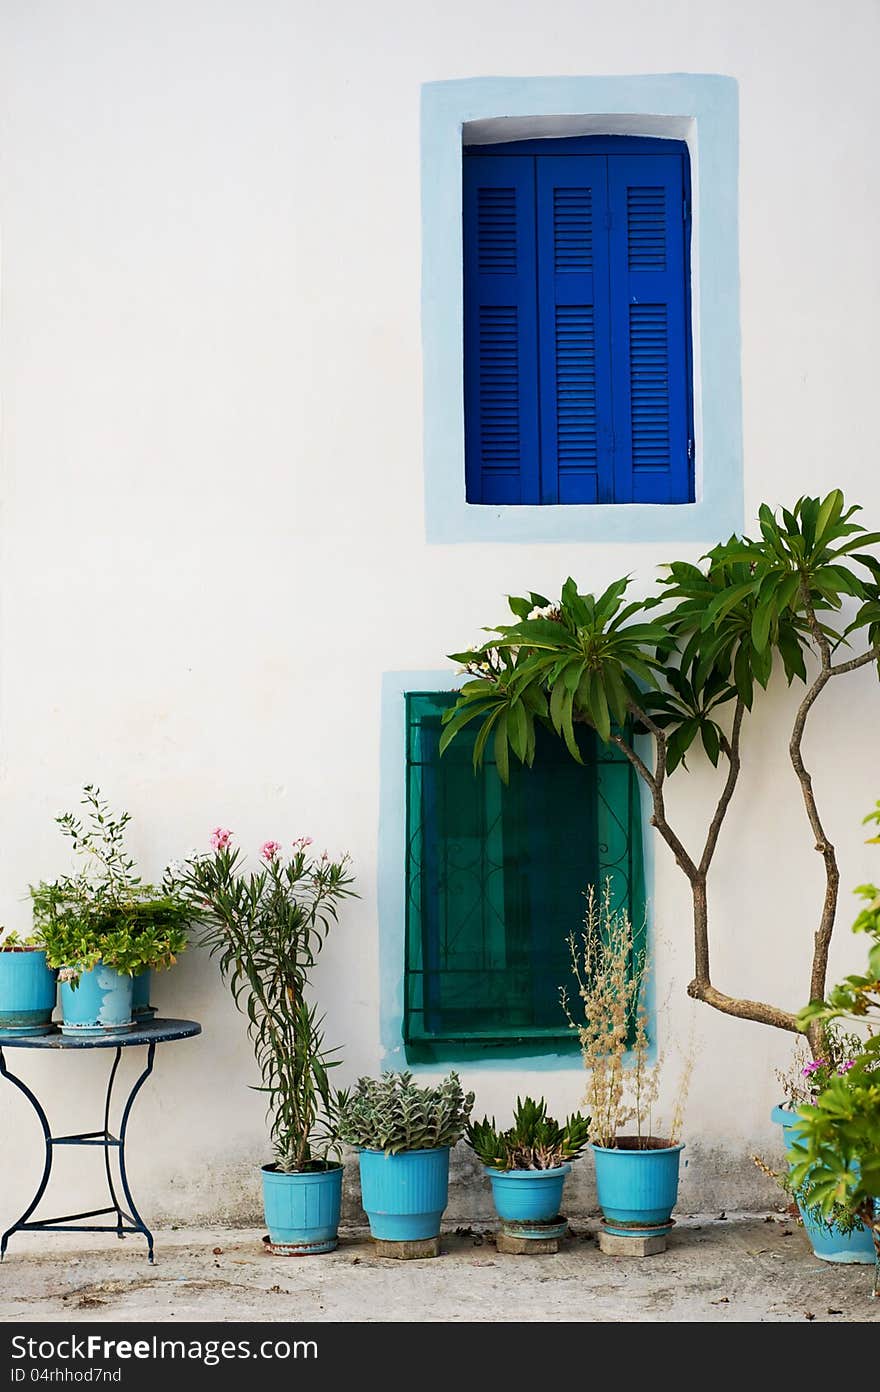 Wall with colored windows from a traditional Greek house in Poros island. Wall with colored windows from a traditional Greek house in Poros island